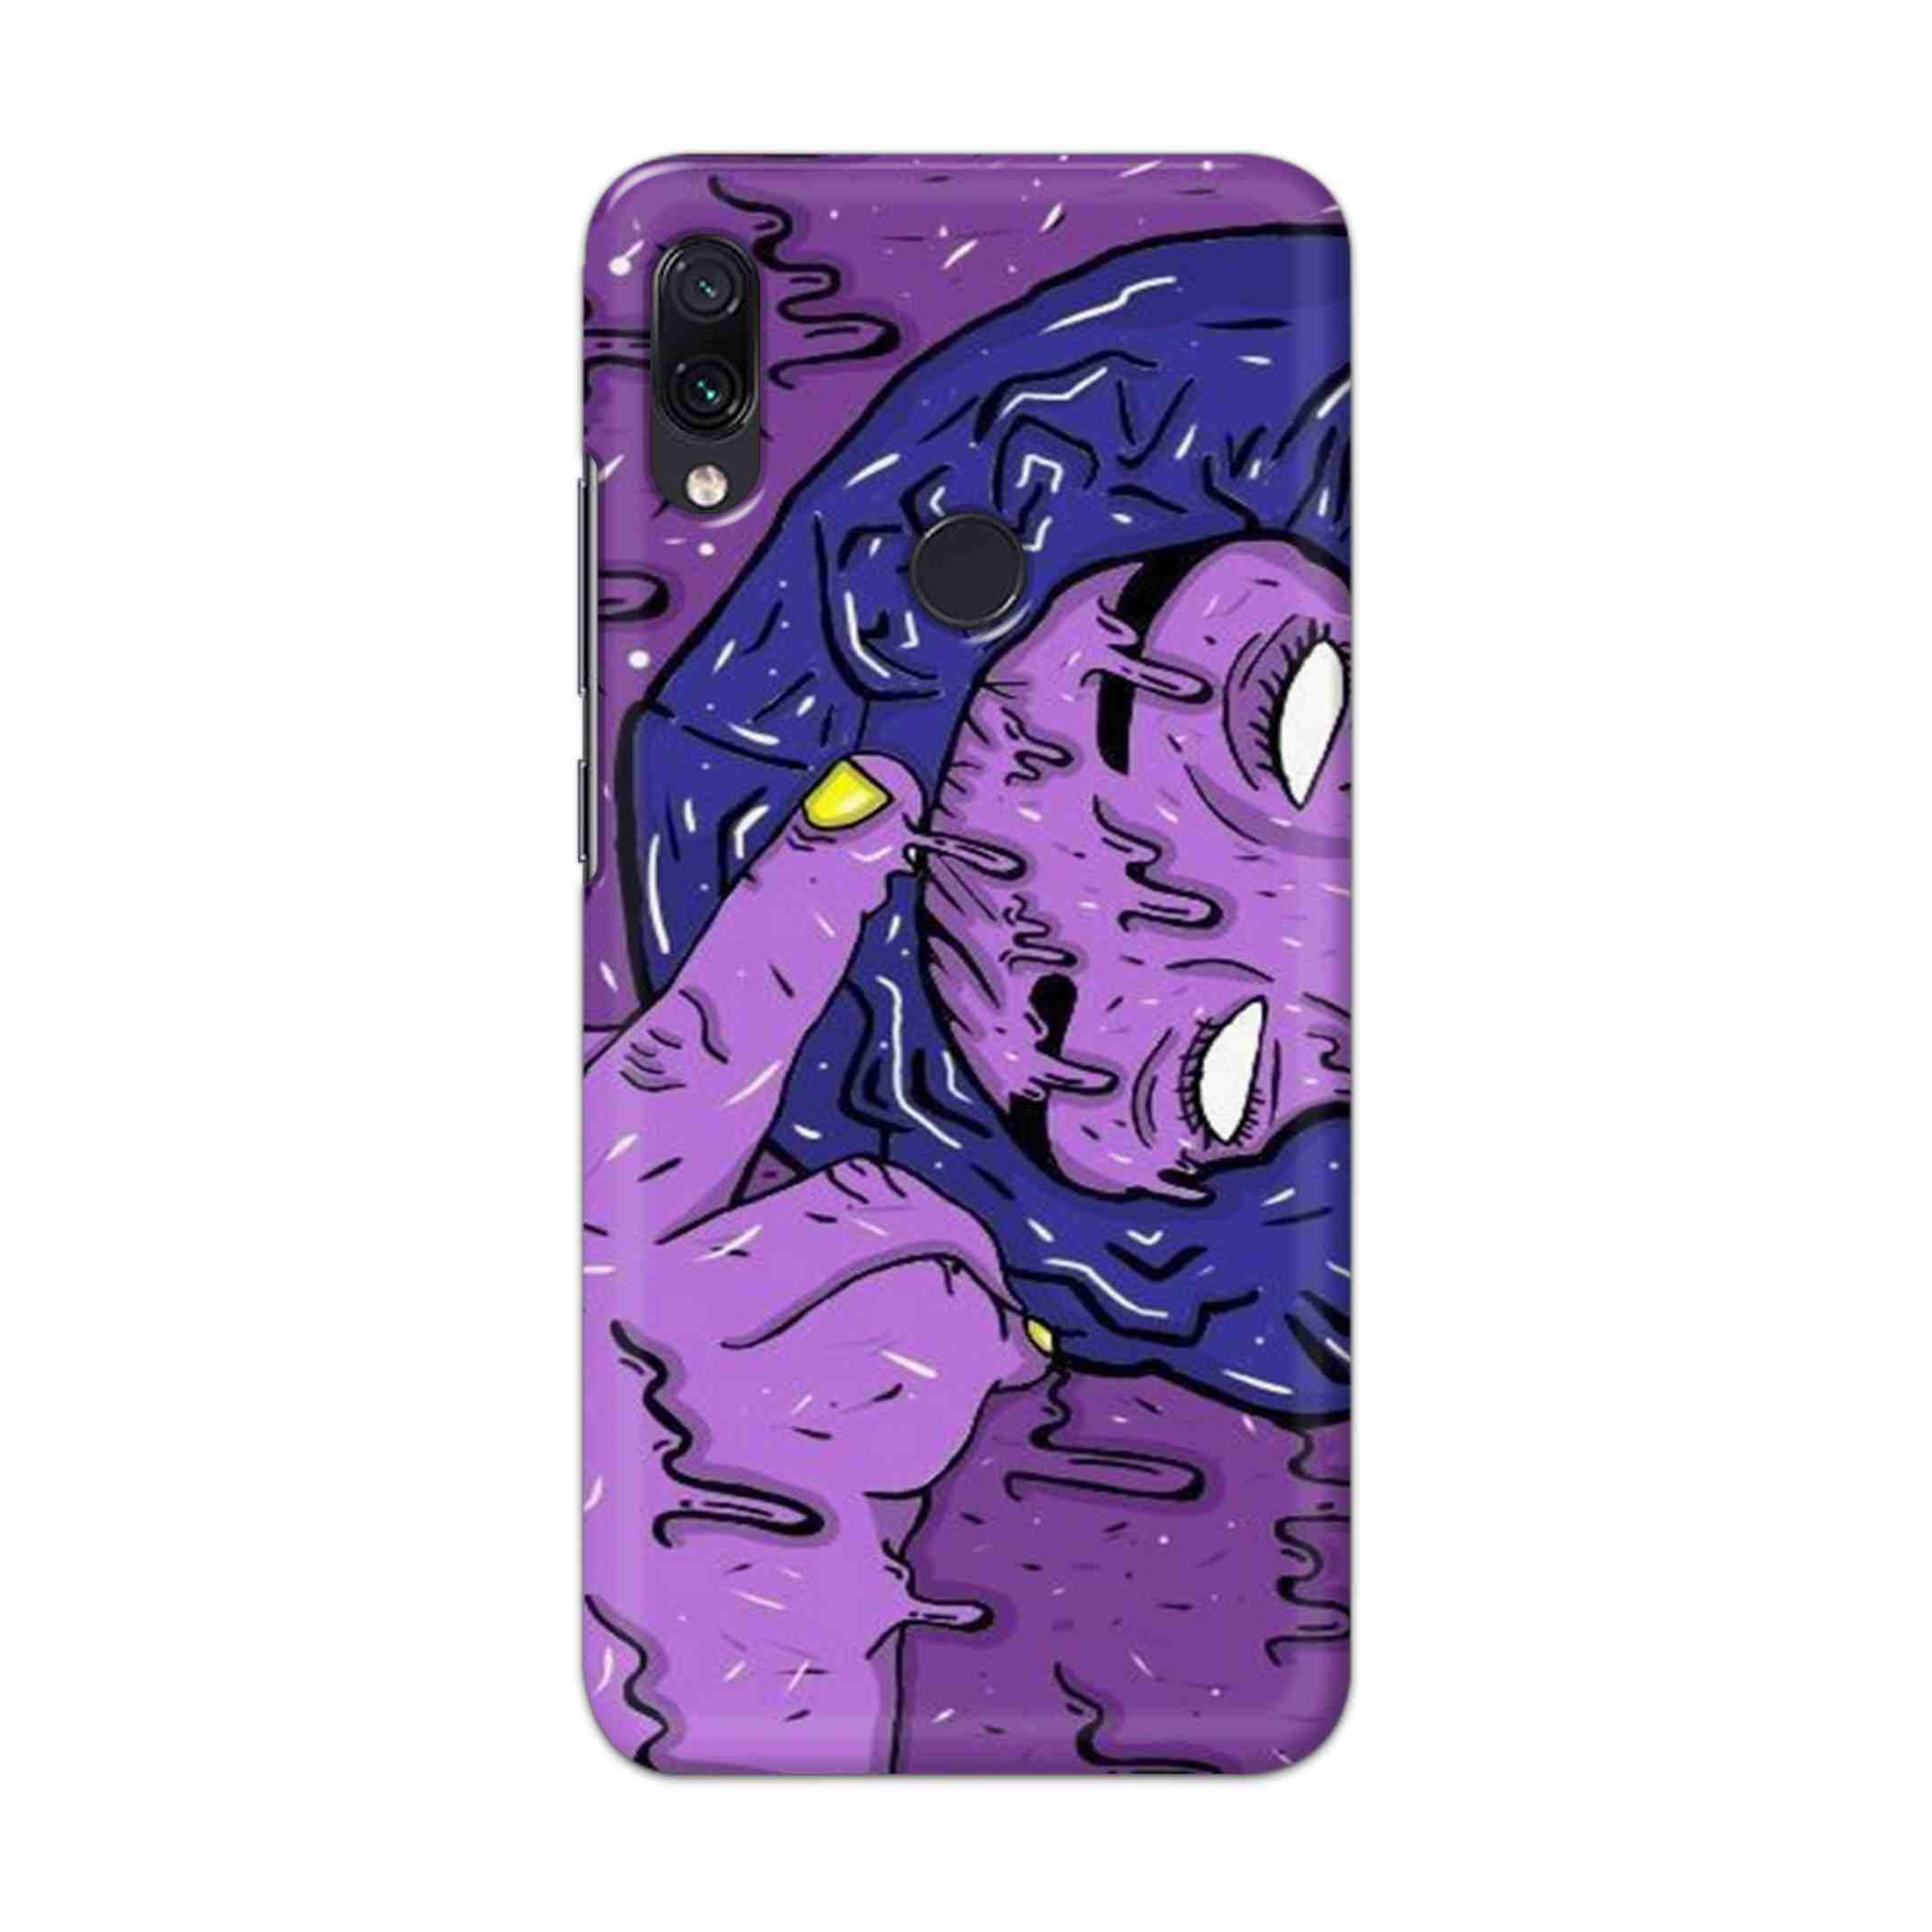 Buy Dashing Art Hard Back Mobile Phone Case Cover For Xiaomi Redmi 7 Online